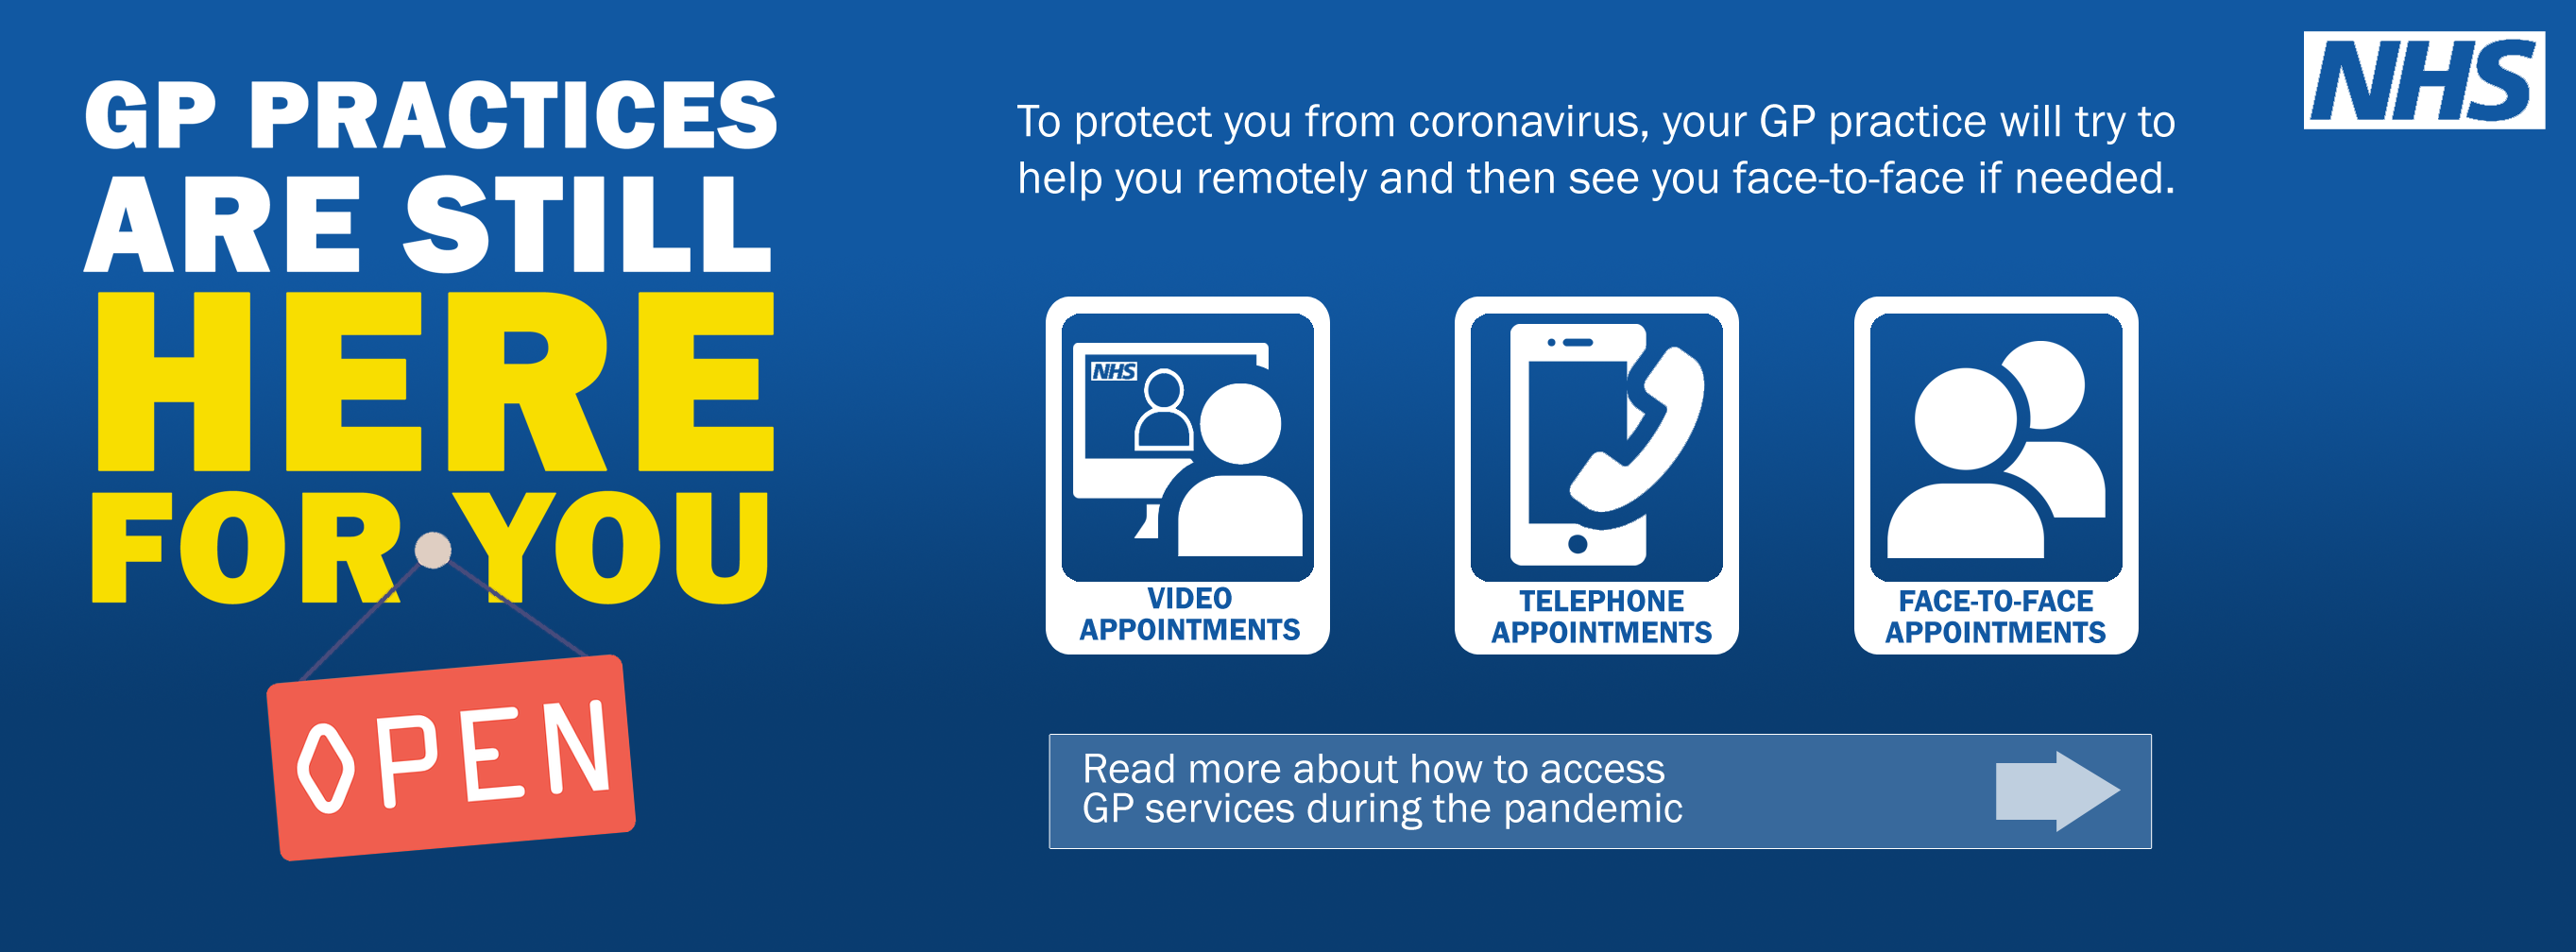 GP practices are still here for you. To protect you from coronavirus, your GP practice will try to help you remotely and then see you face-to-face if needed.